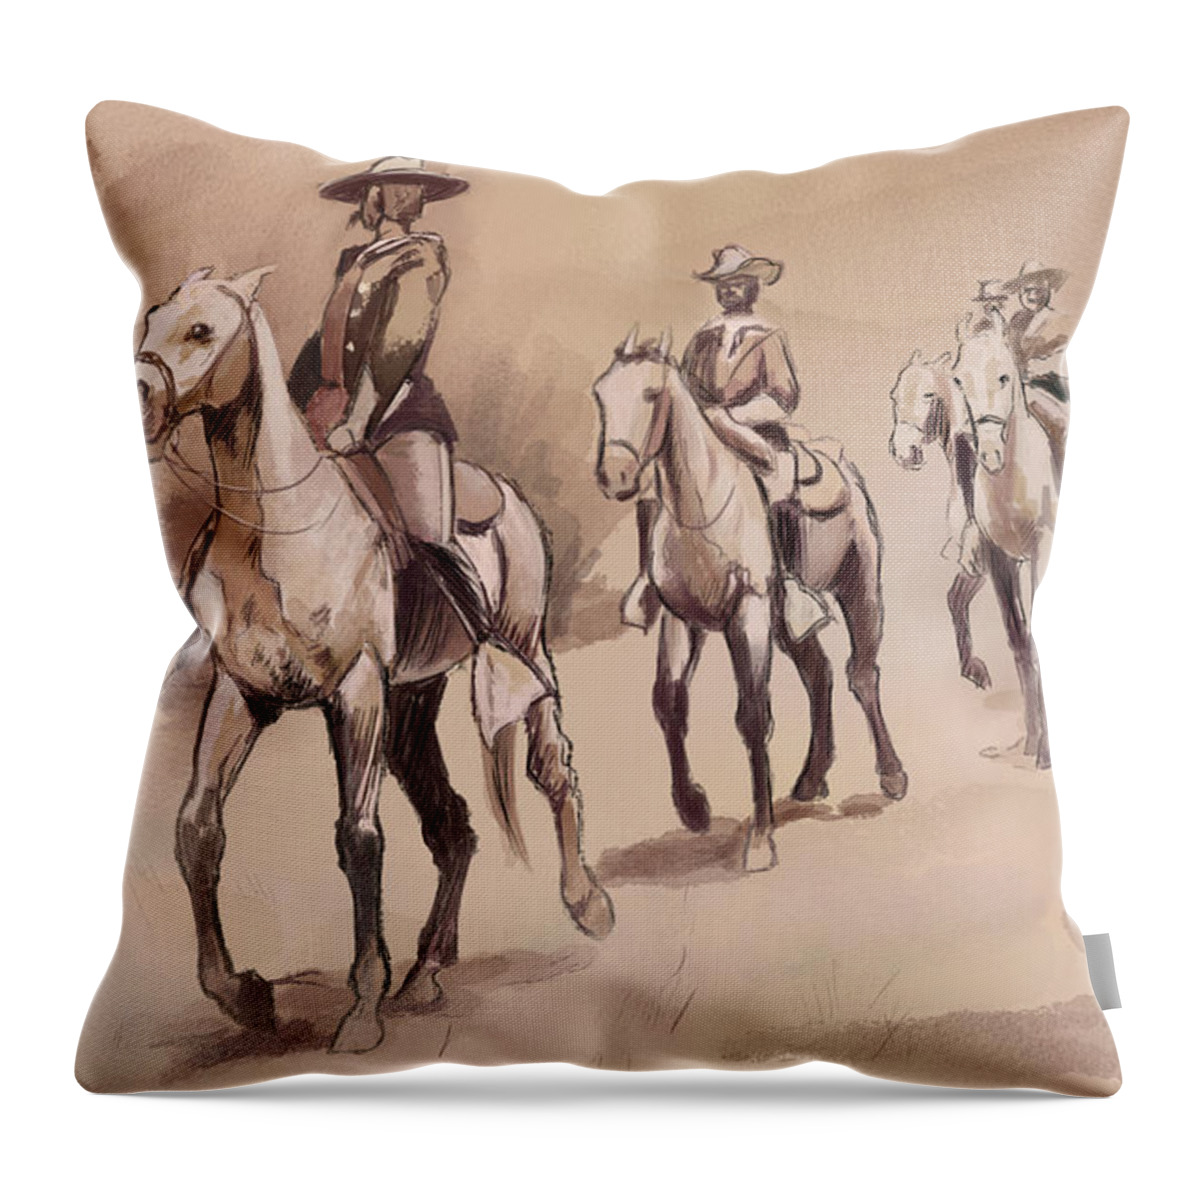 Copy Throw Pillow featuring the digital art After In The Desert by Kate Black